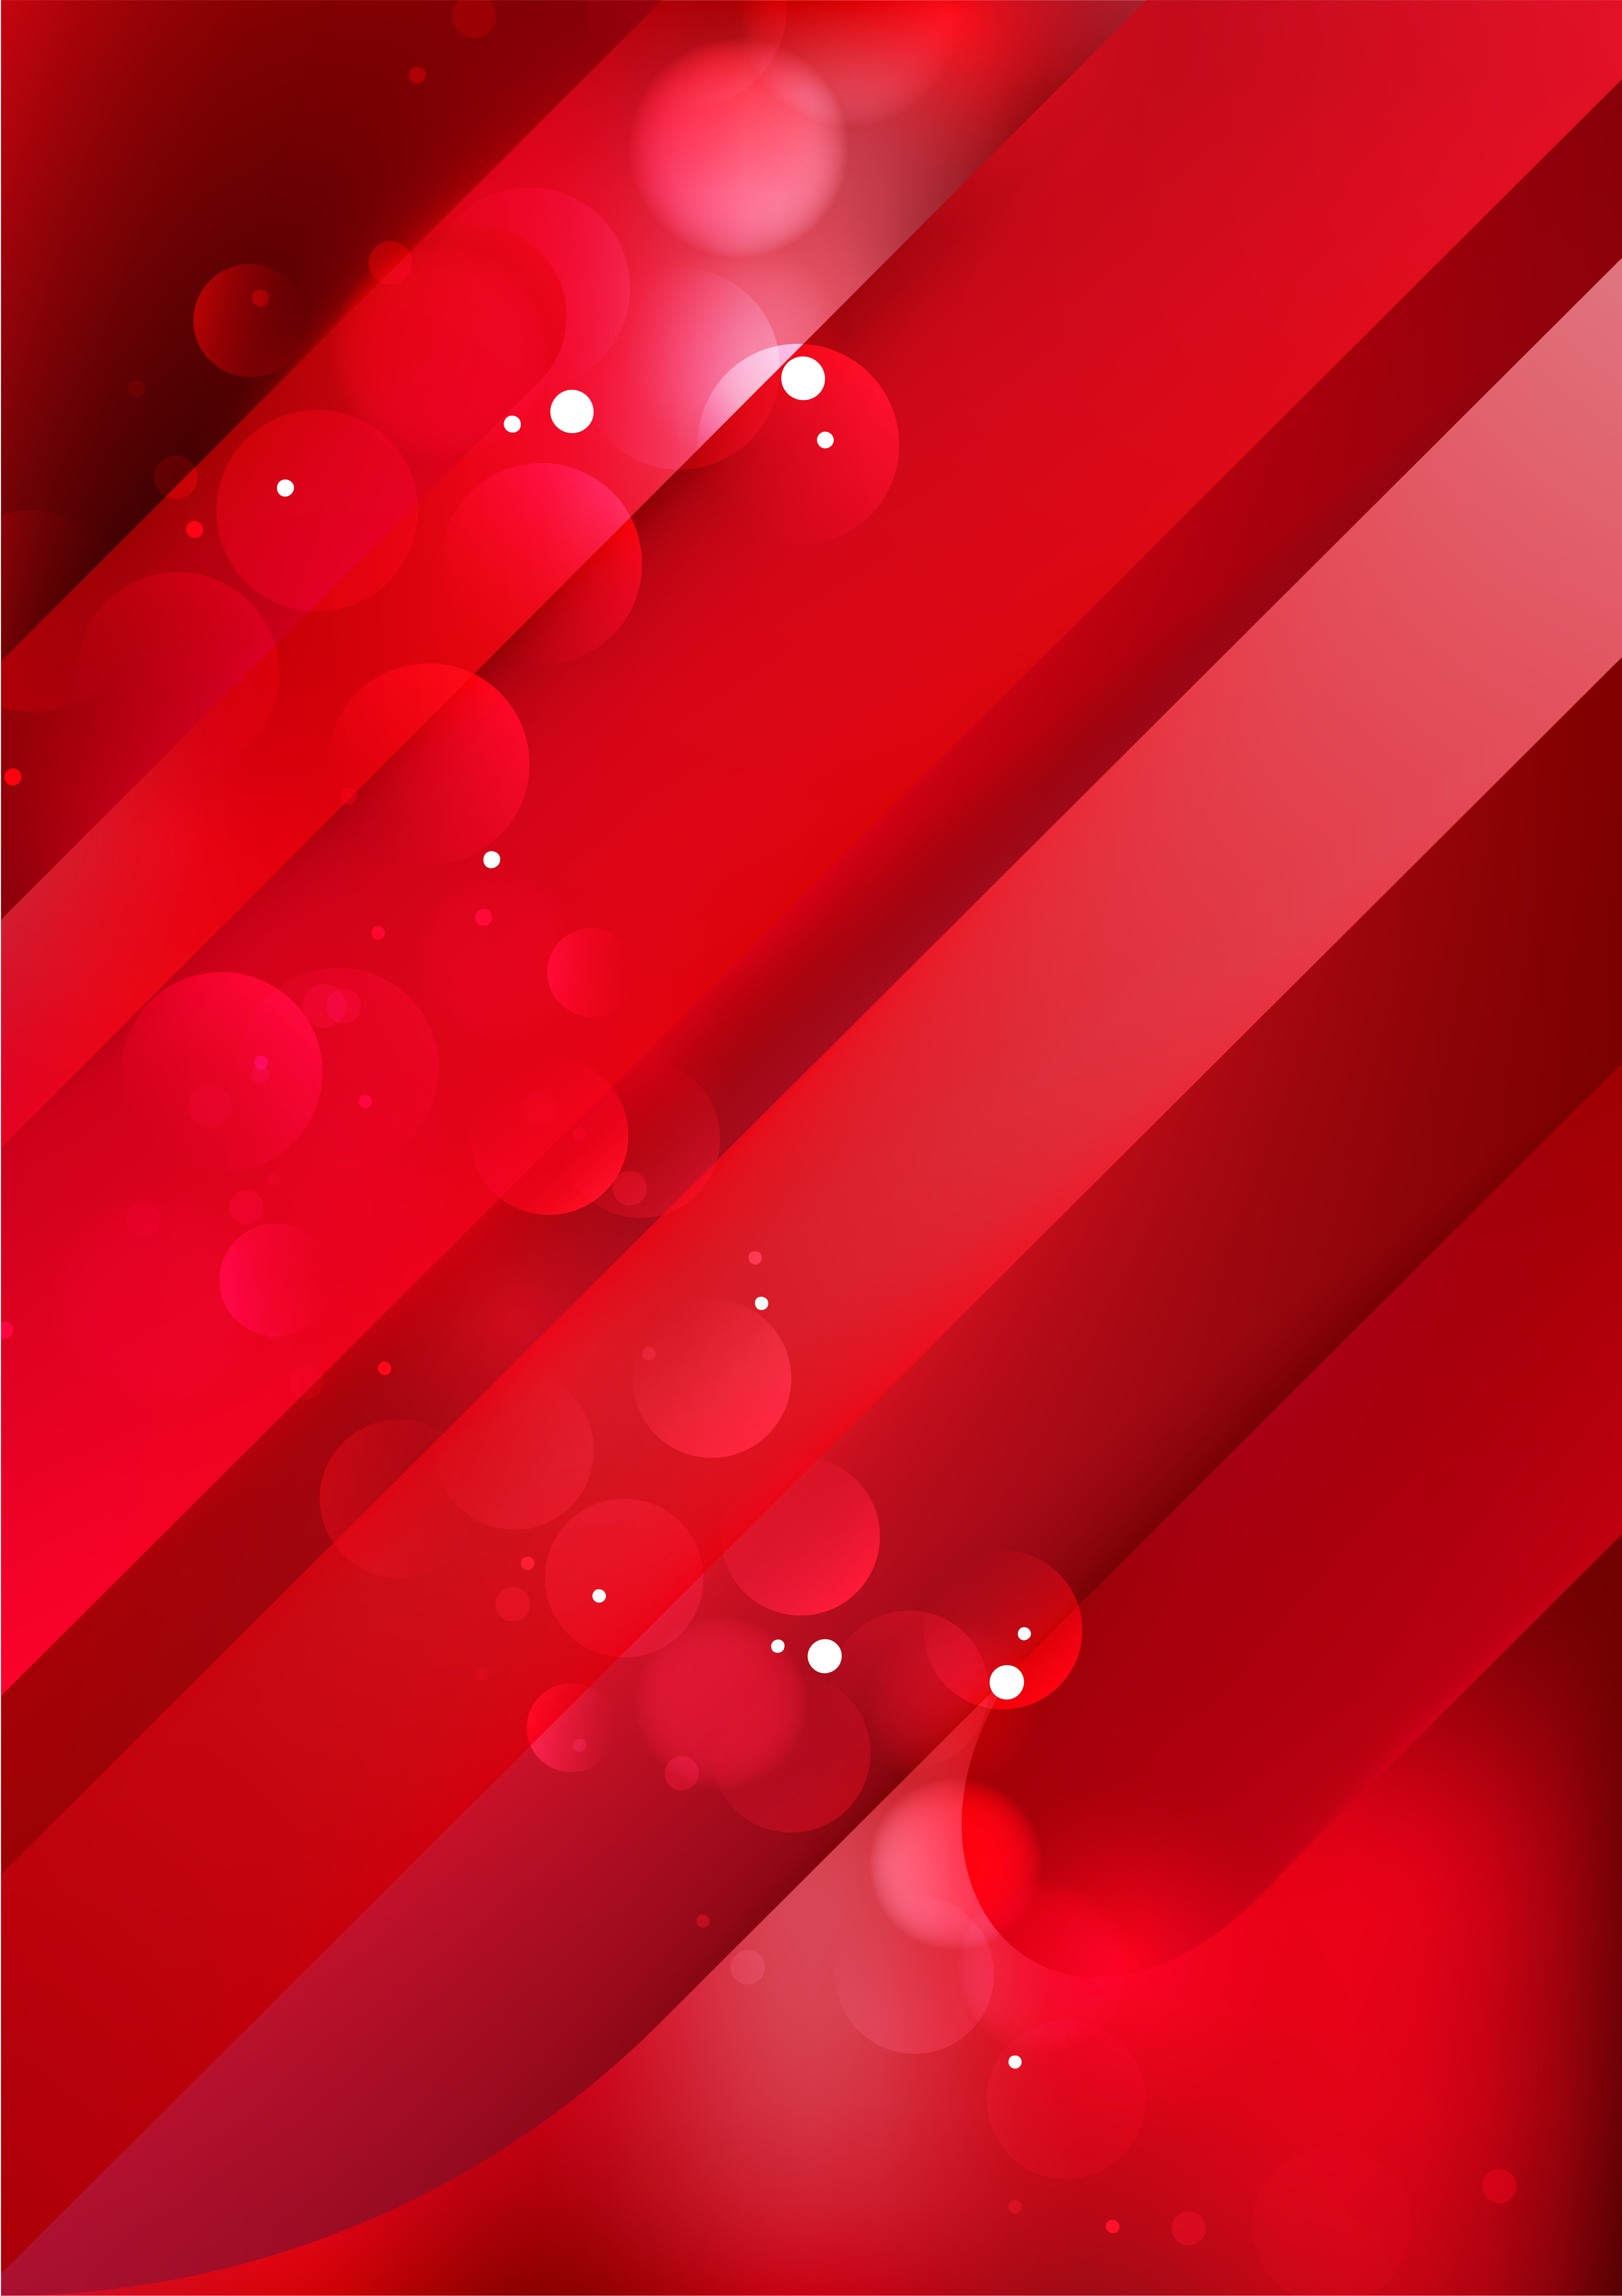 Free Shiny Abstract Red Background Vector Image